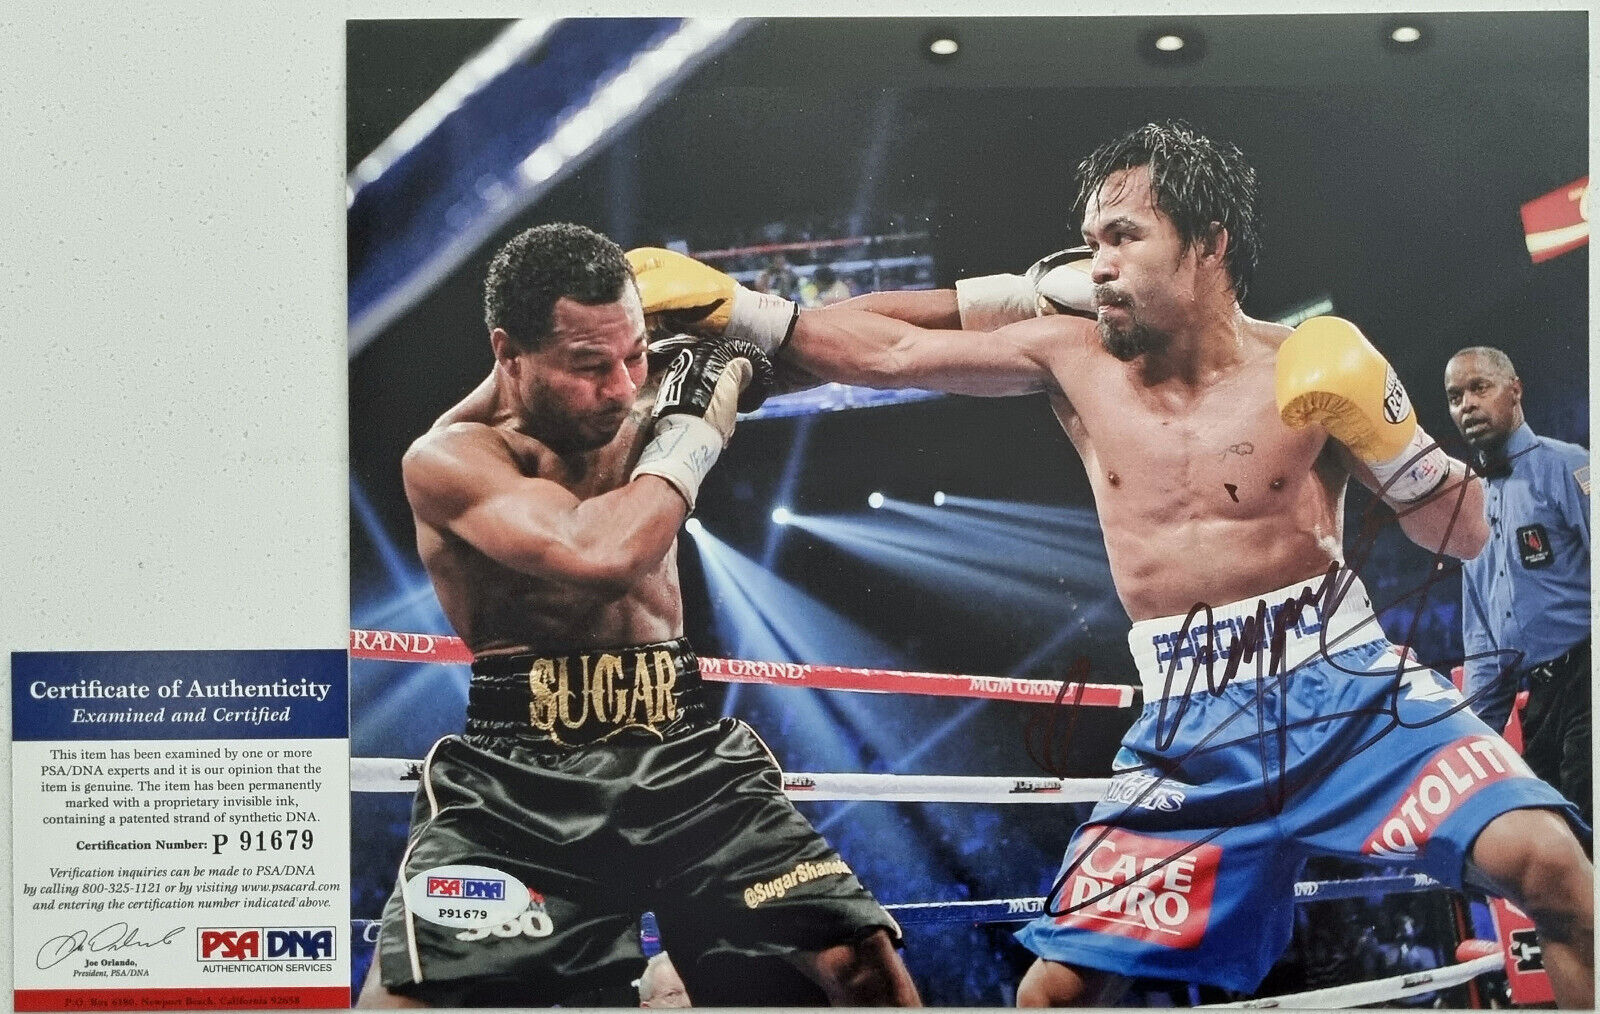 Manny PACQUIAO 'Pacman' Signed 8"x10" inch Photograph (PSA DNA # P91679)